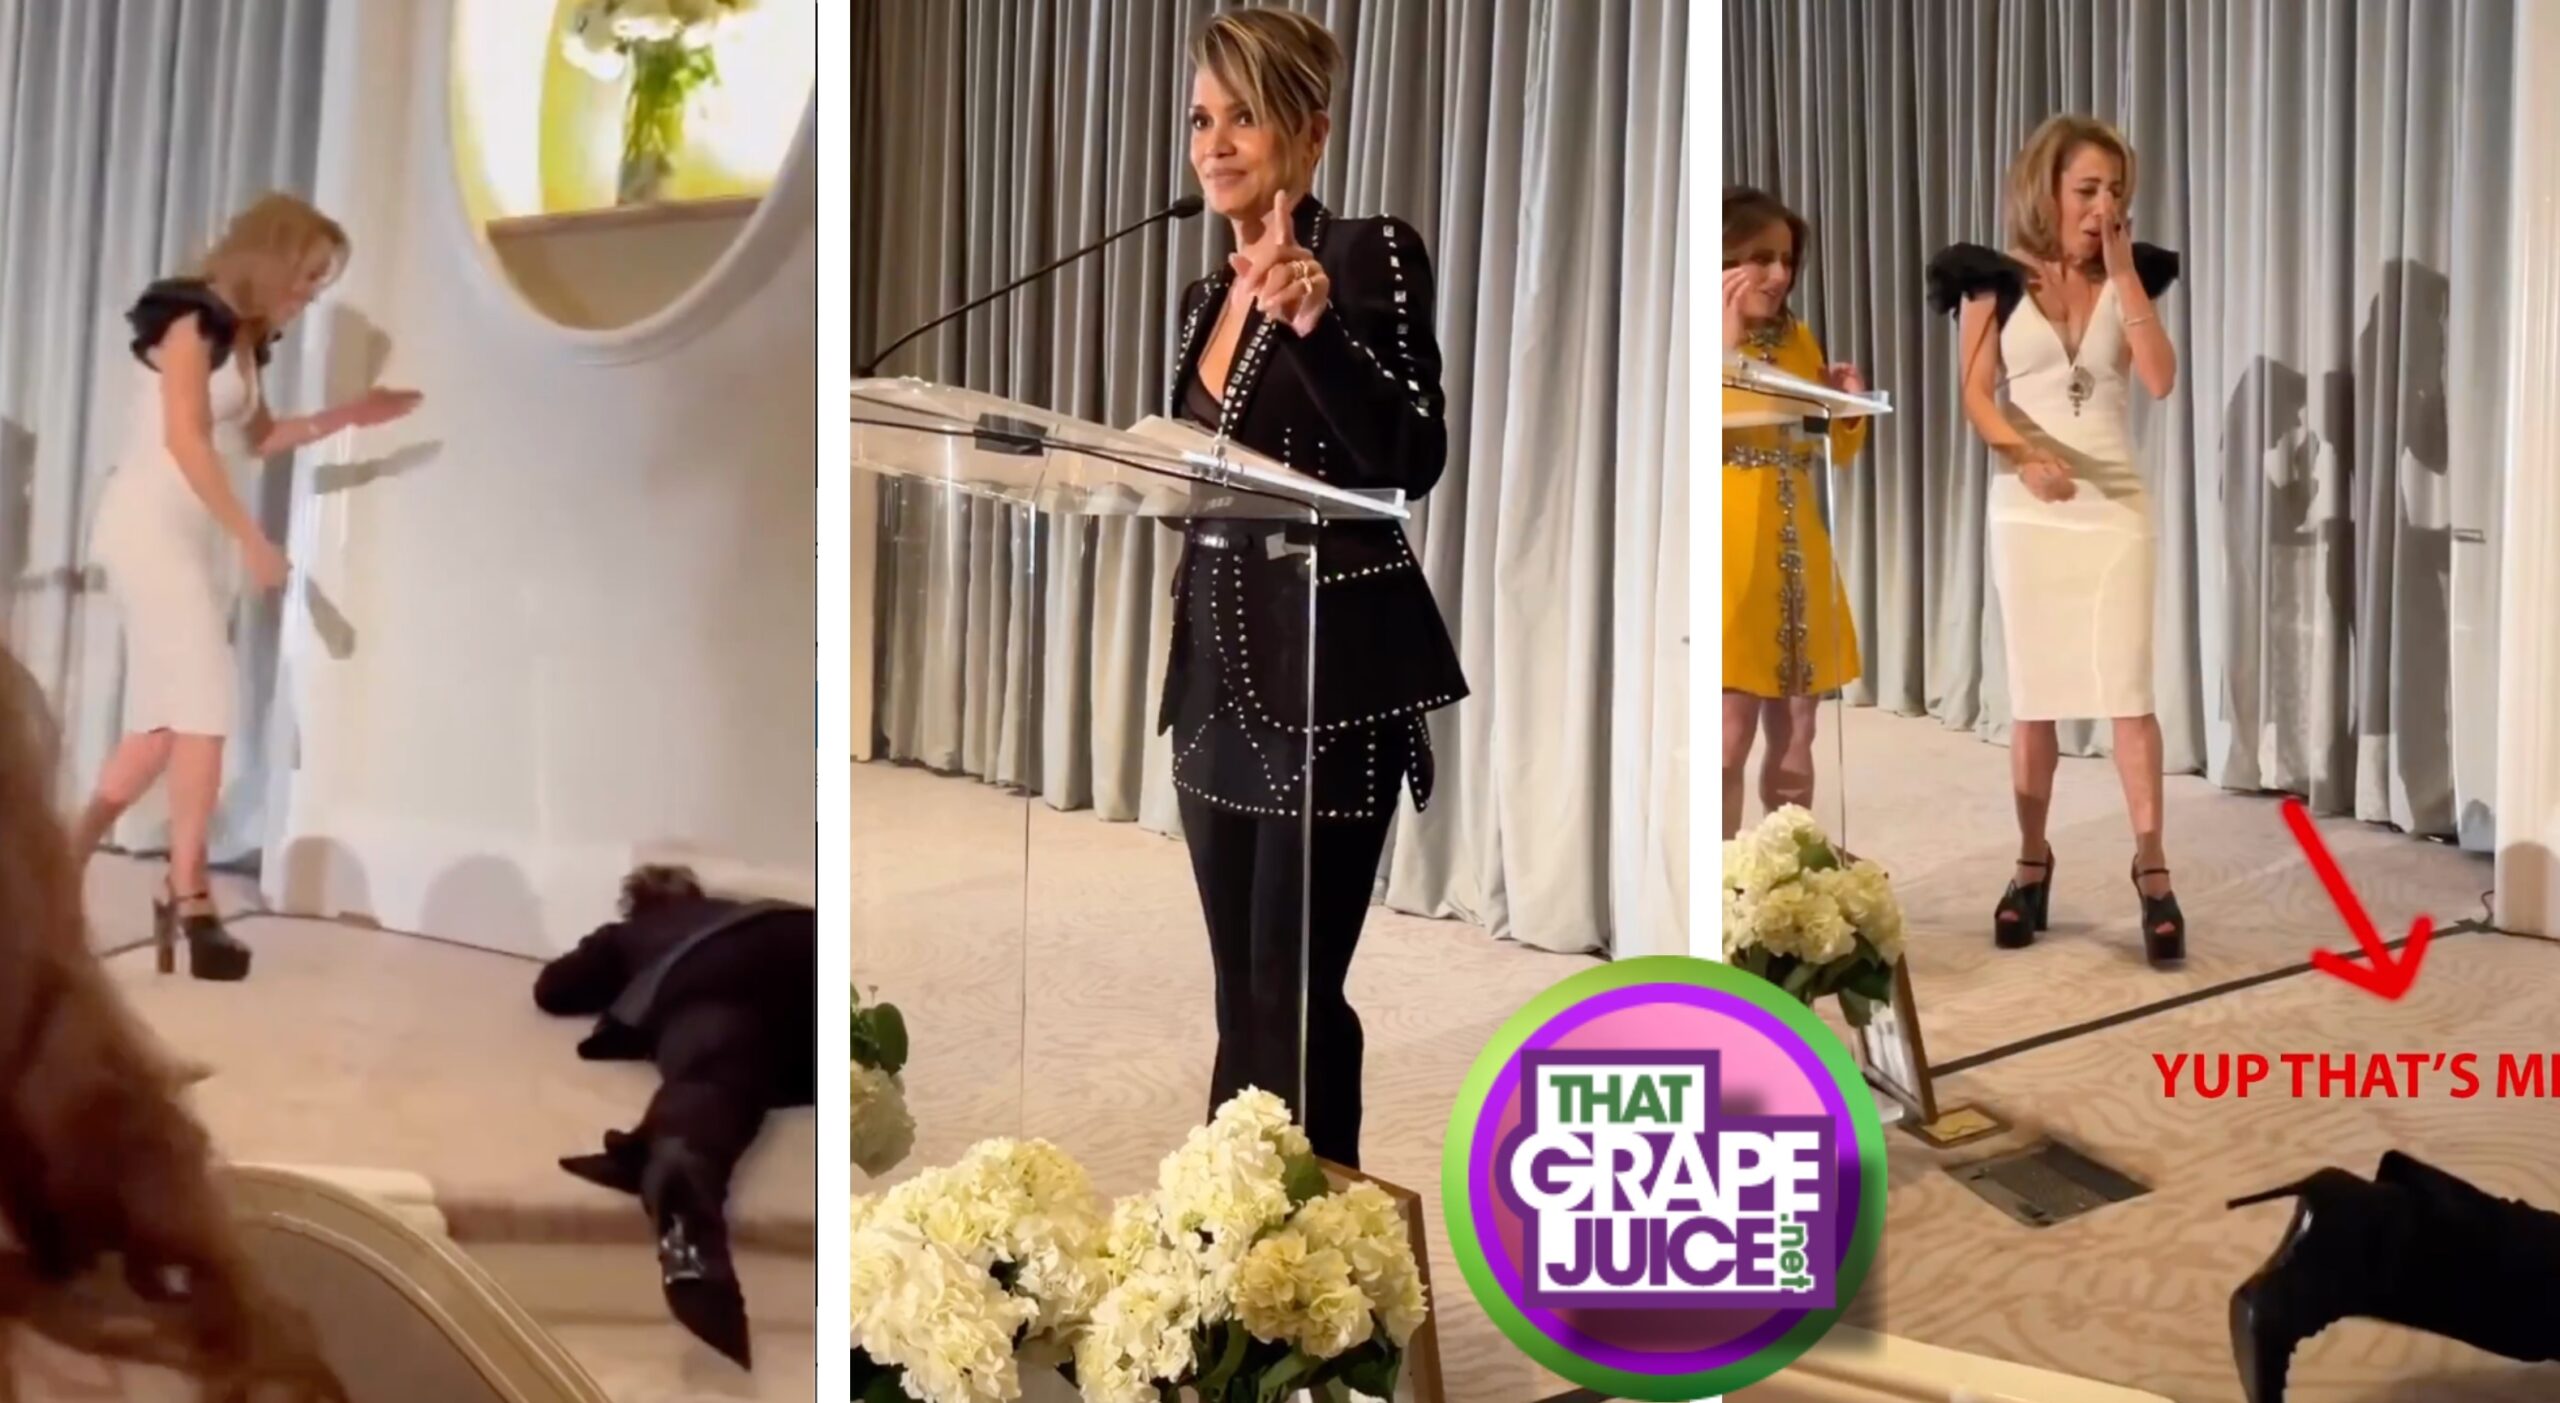 Halle Berry Takes a Tumble at Charity Event: “Sometimes You Bust Your A**” [Video]